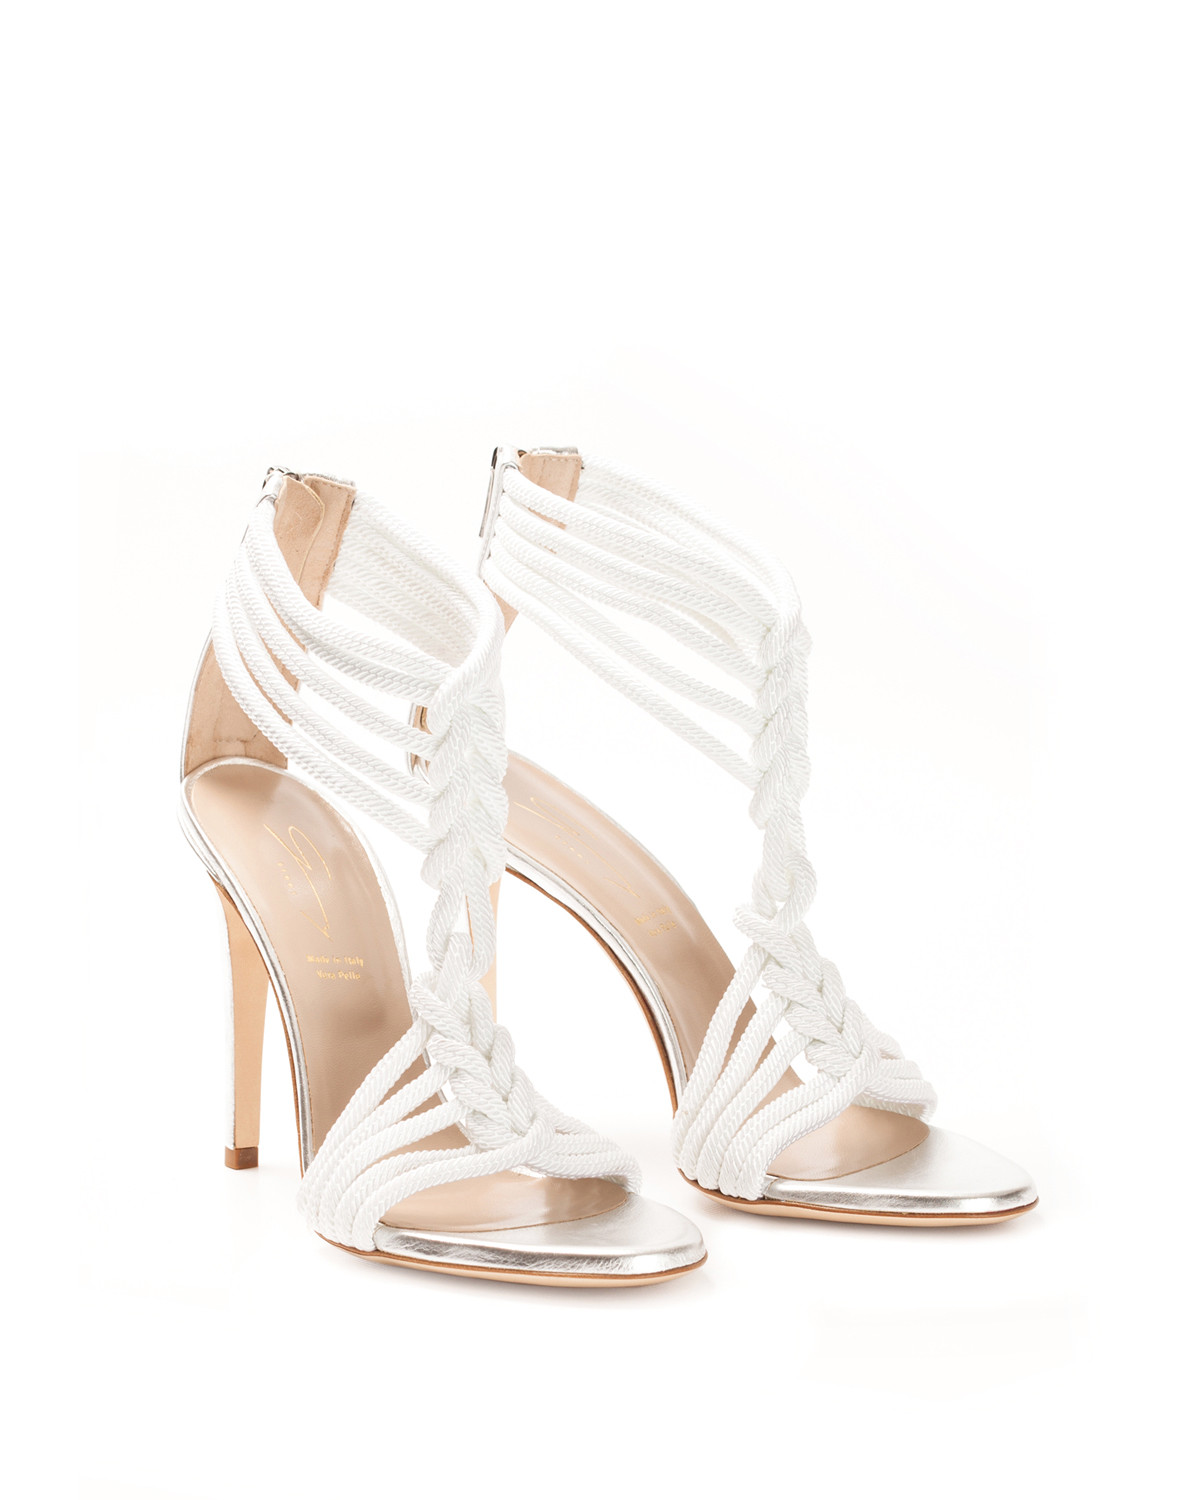 White rope sandals with braided-work